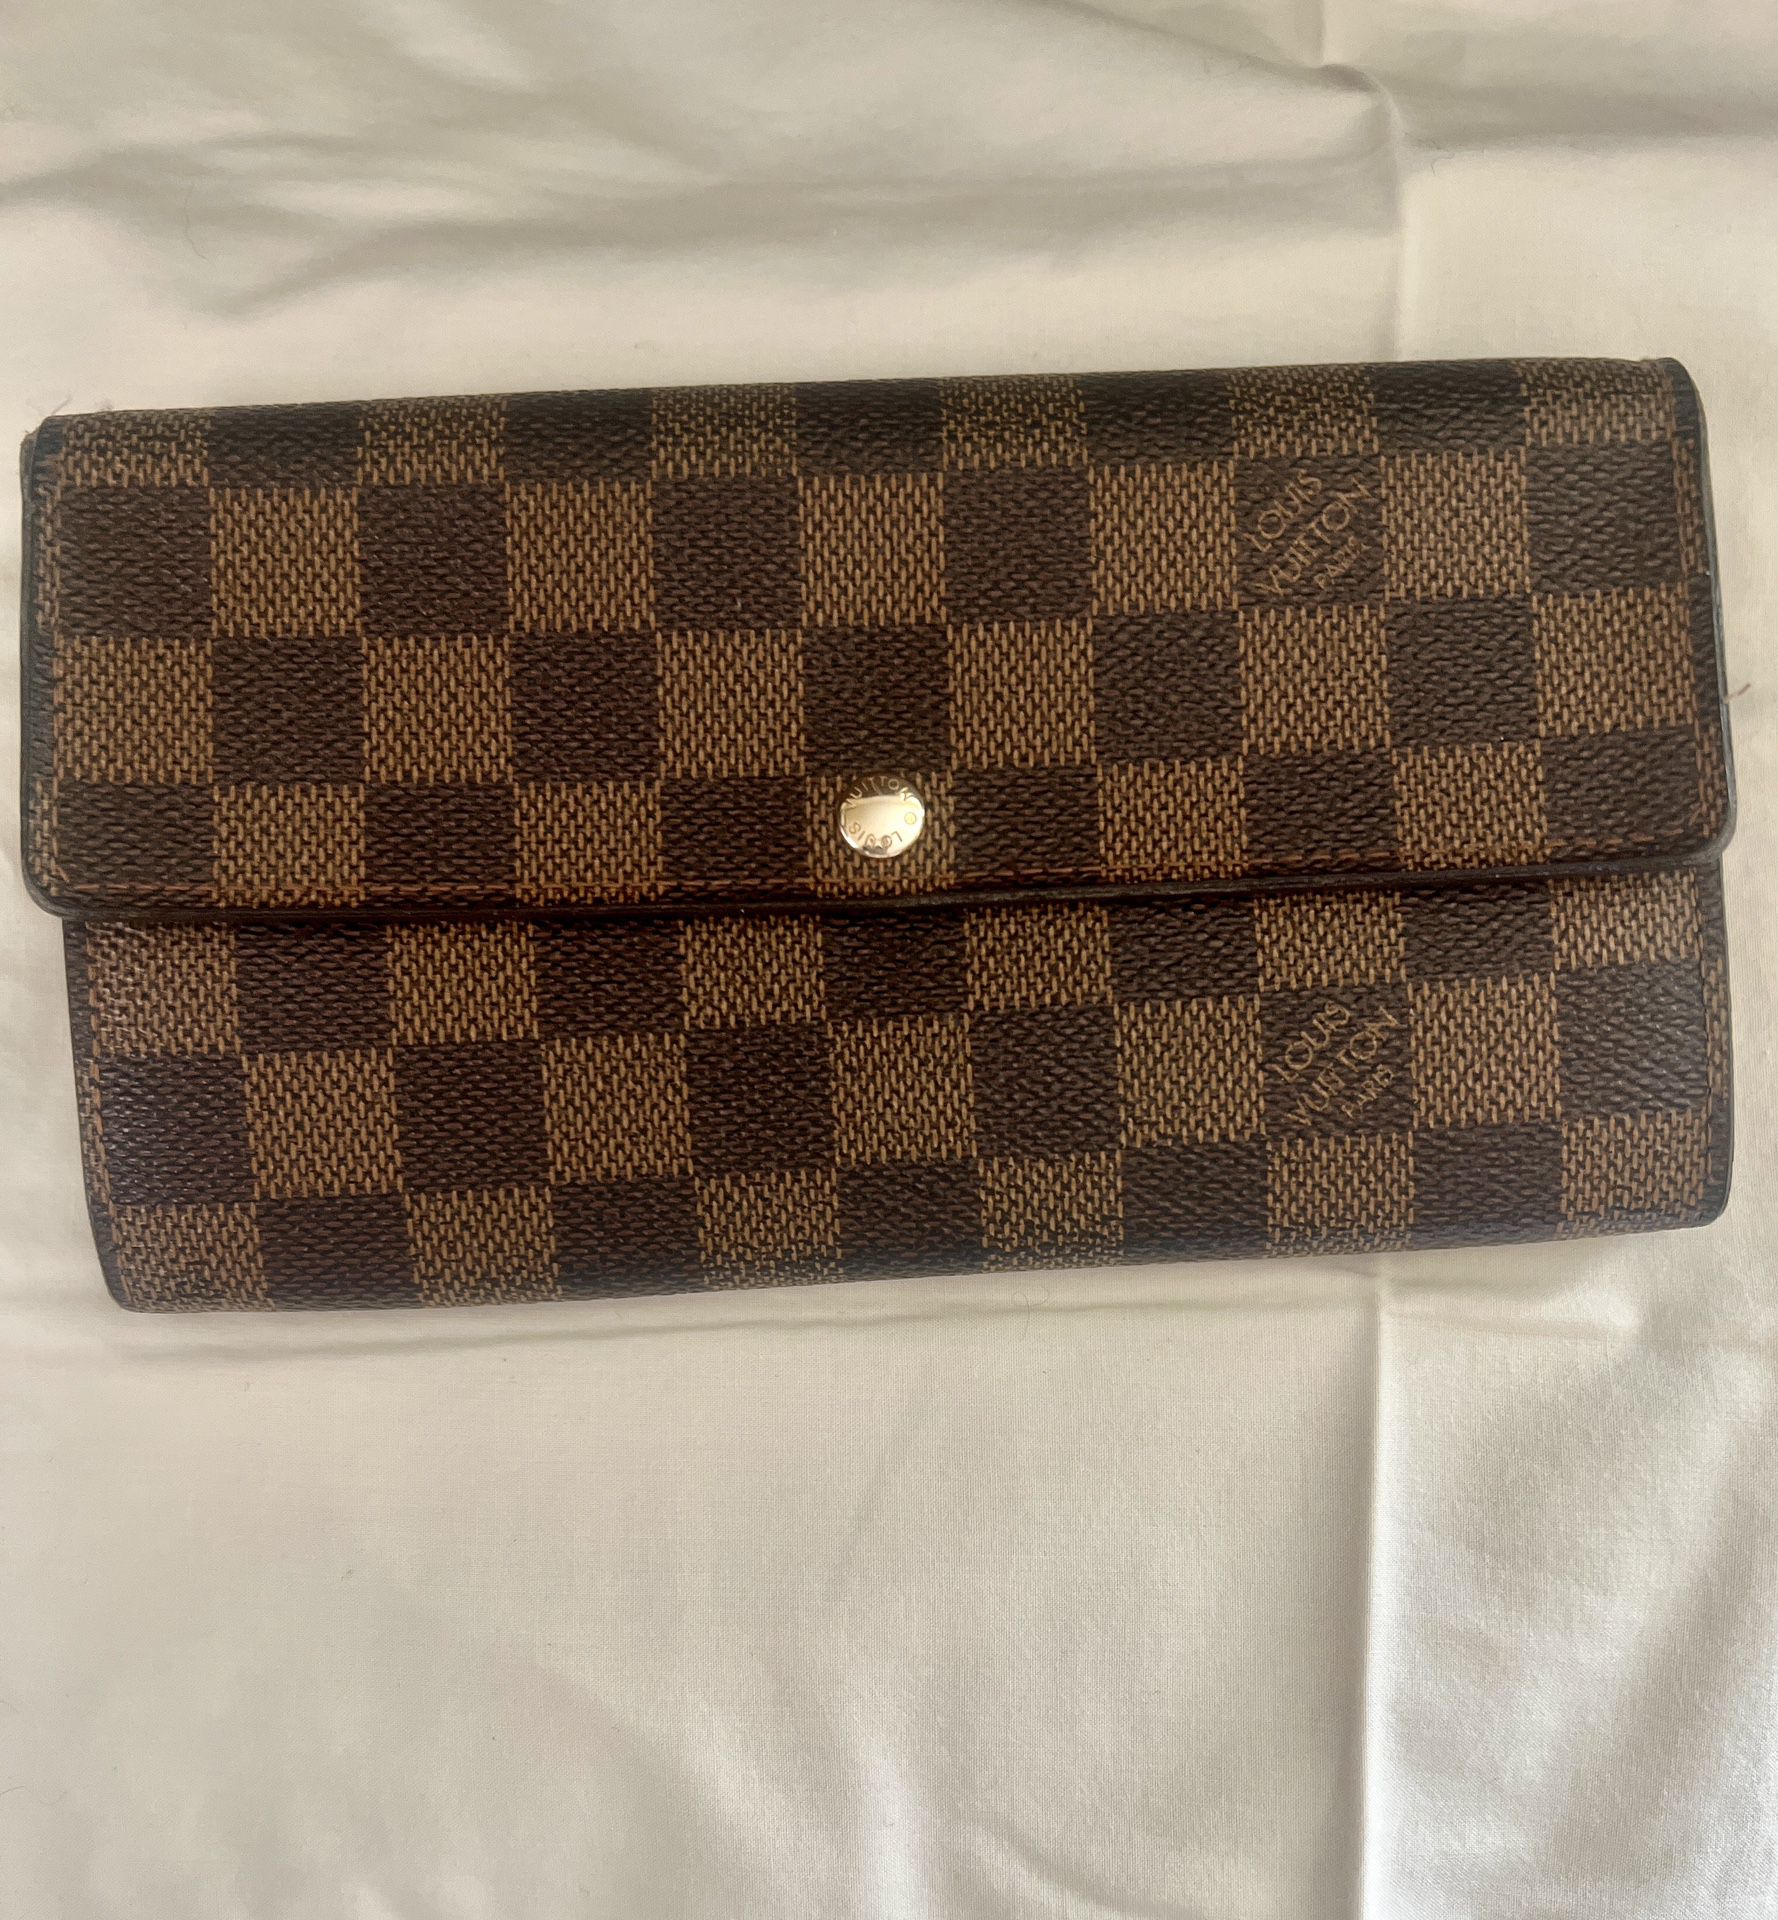 louis vuitton damier wallet disc. today only amazing condition 